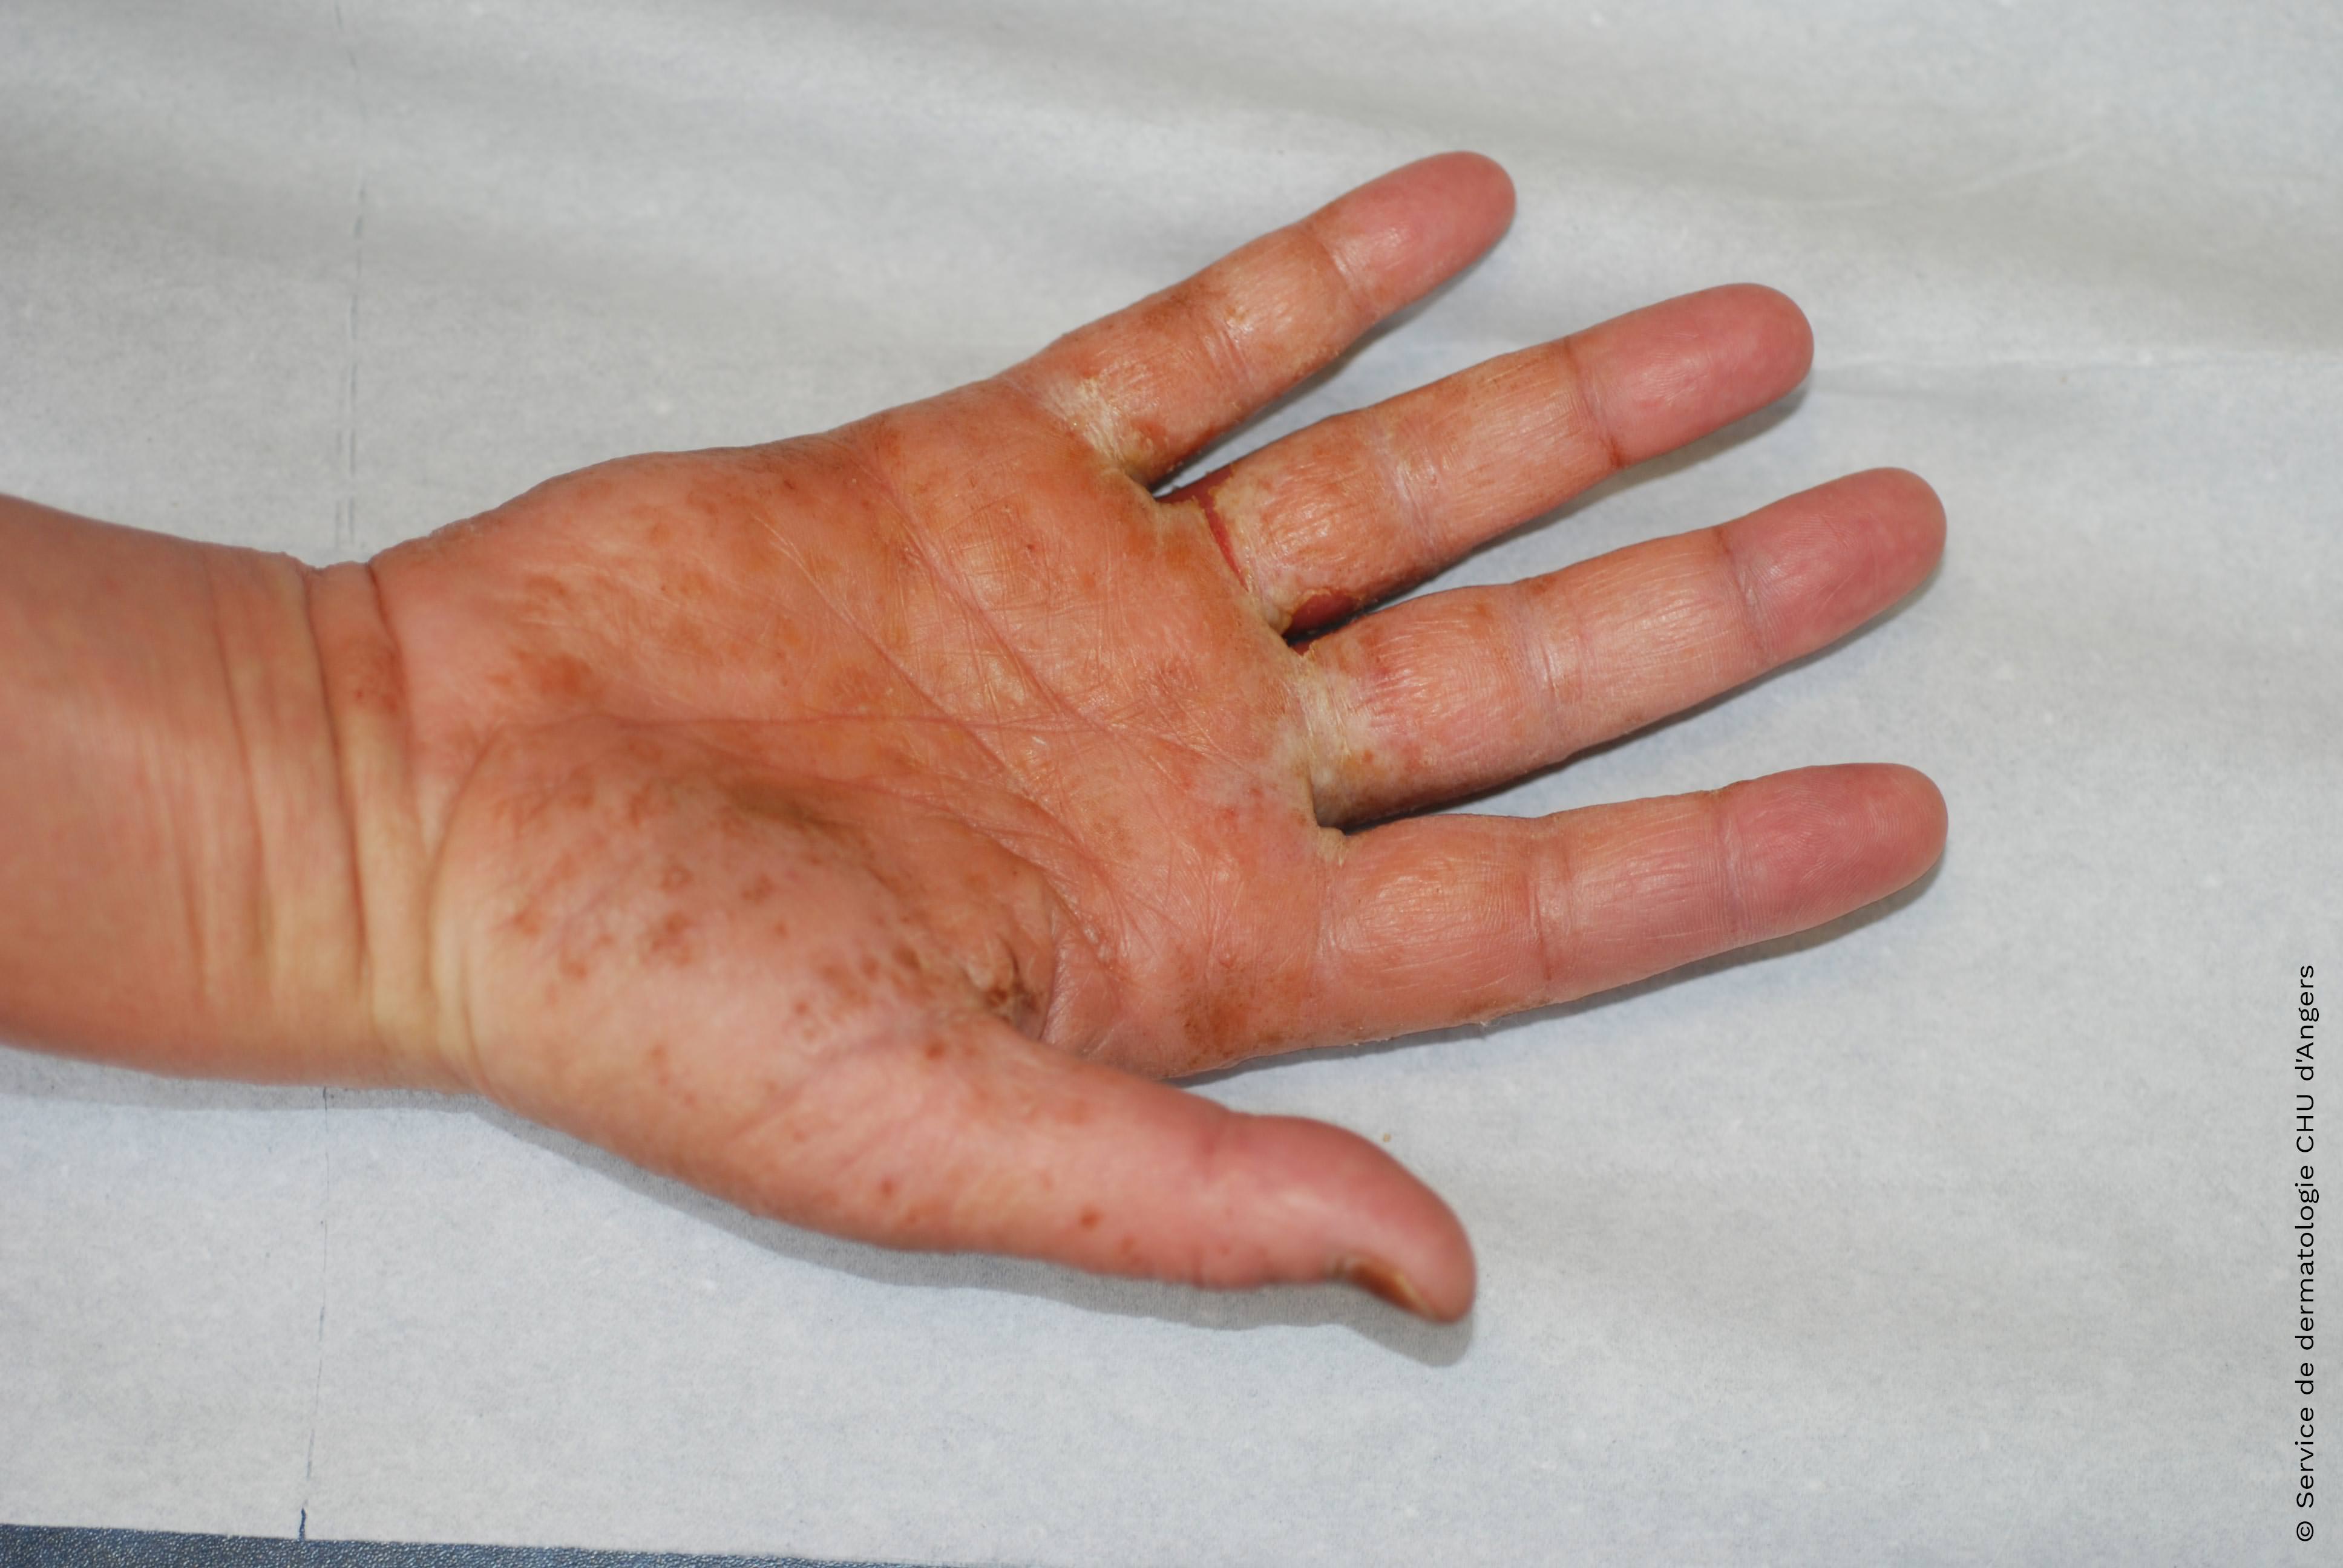 Acute allergic eczema of the palms of the hands